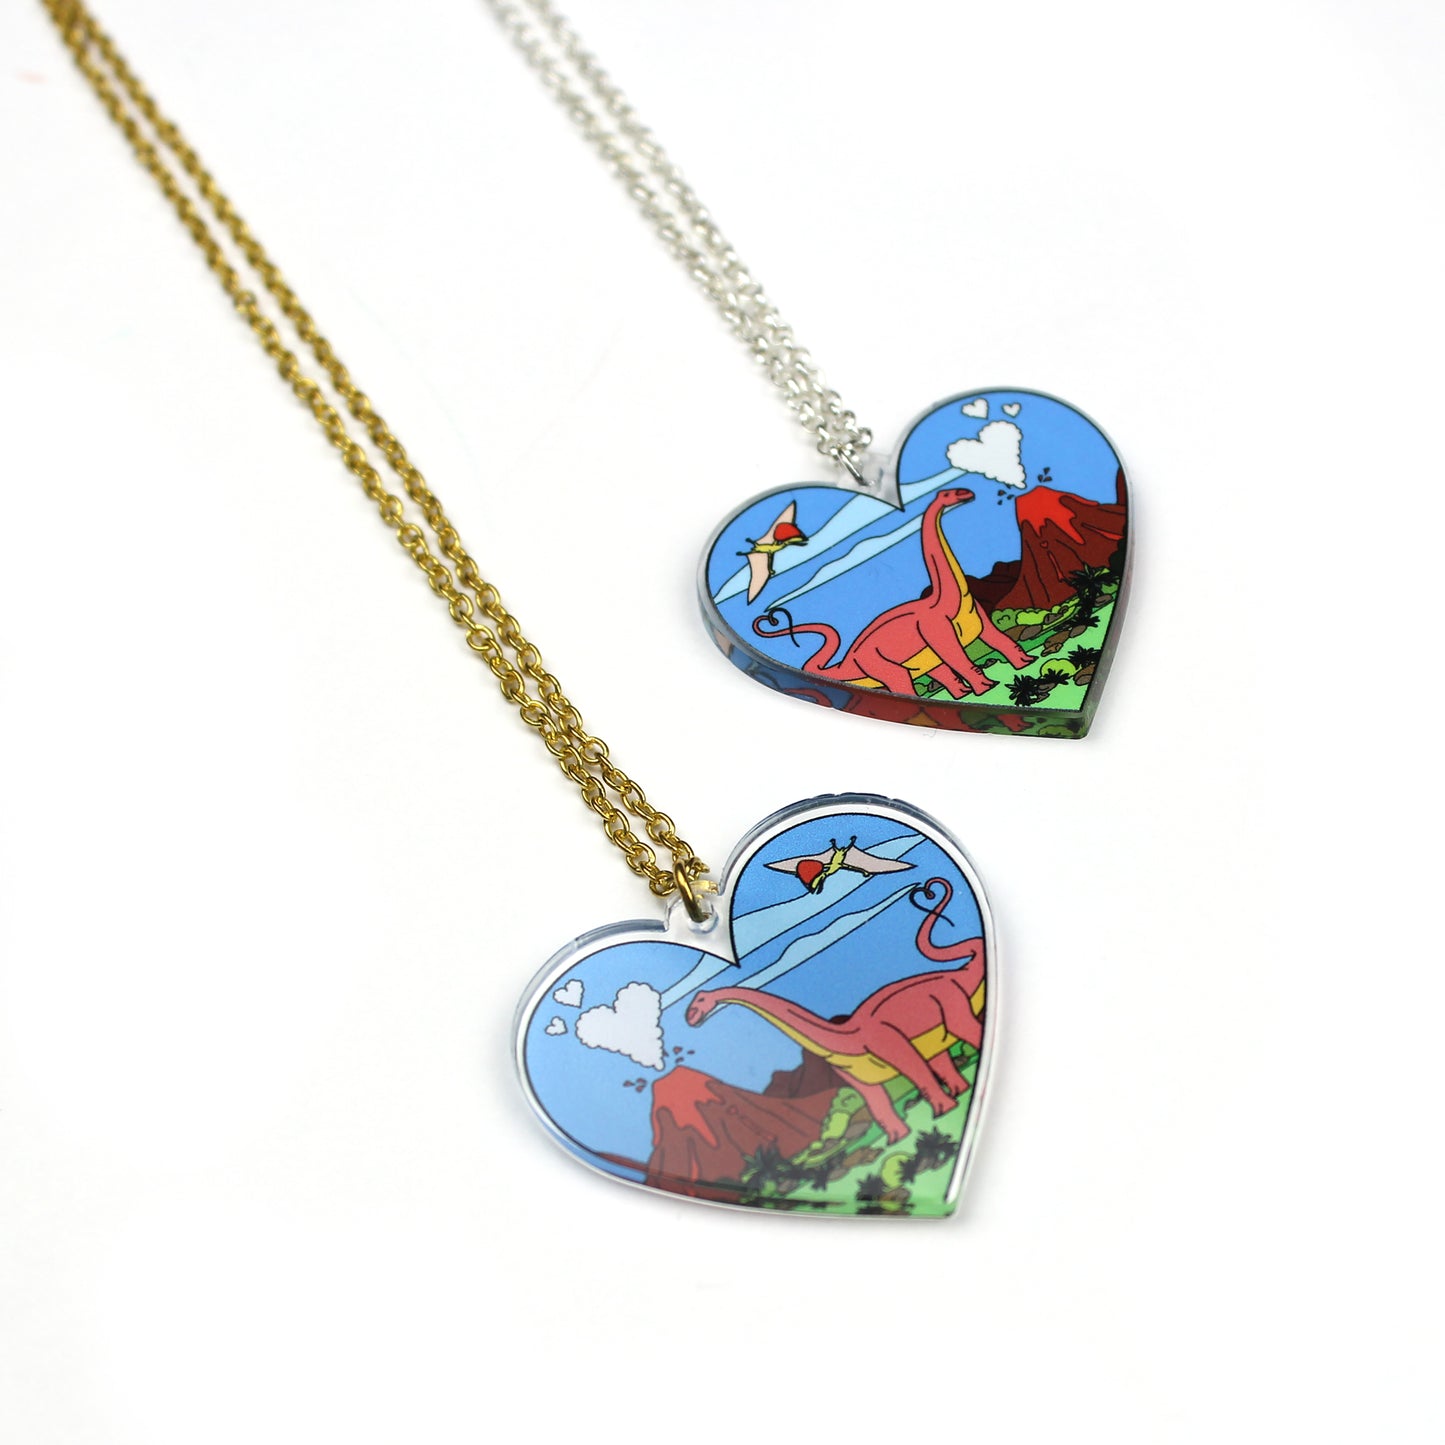 Heart Dinosaur Necklace with gold or silver tone chains